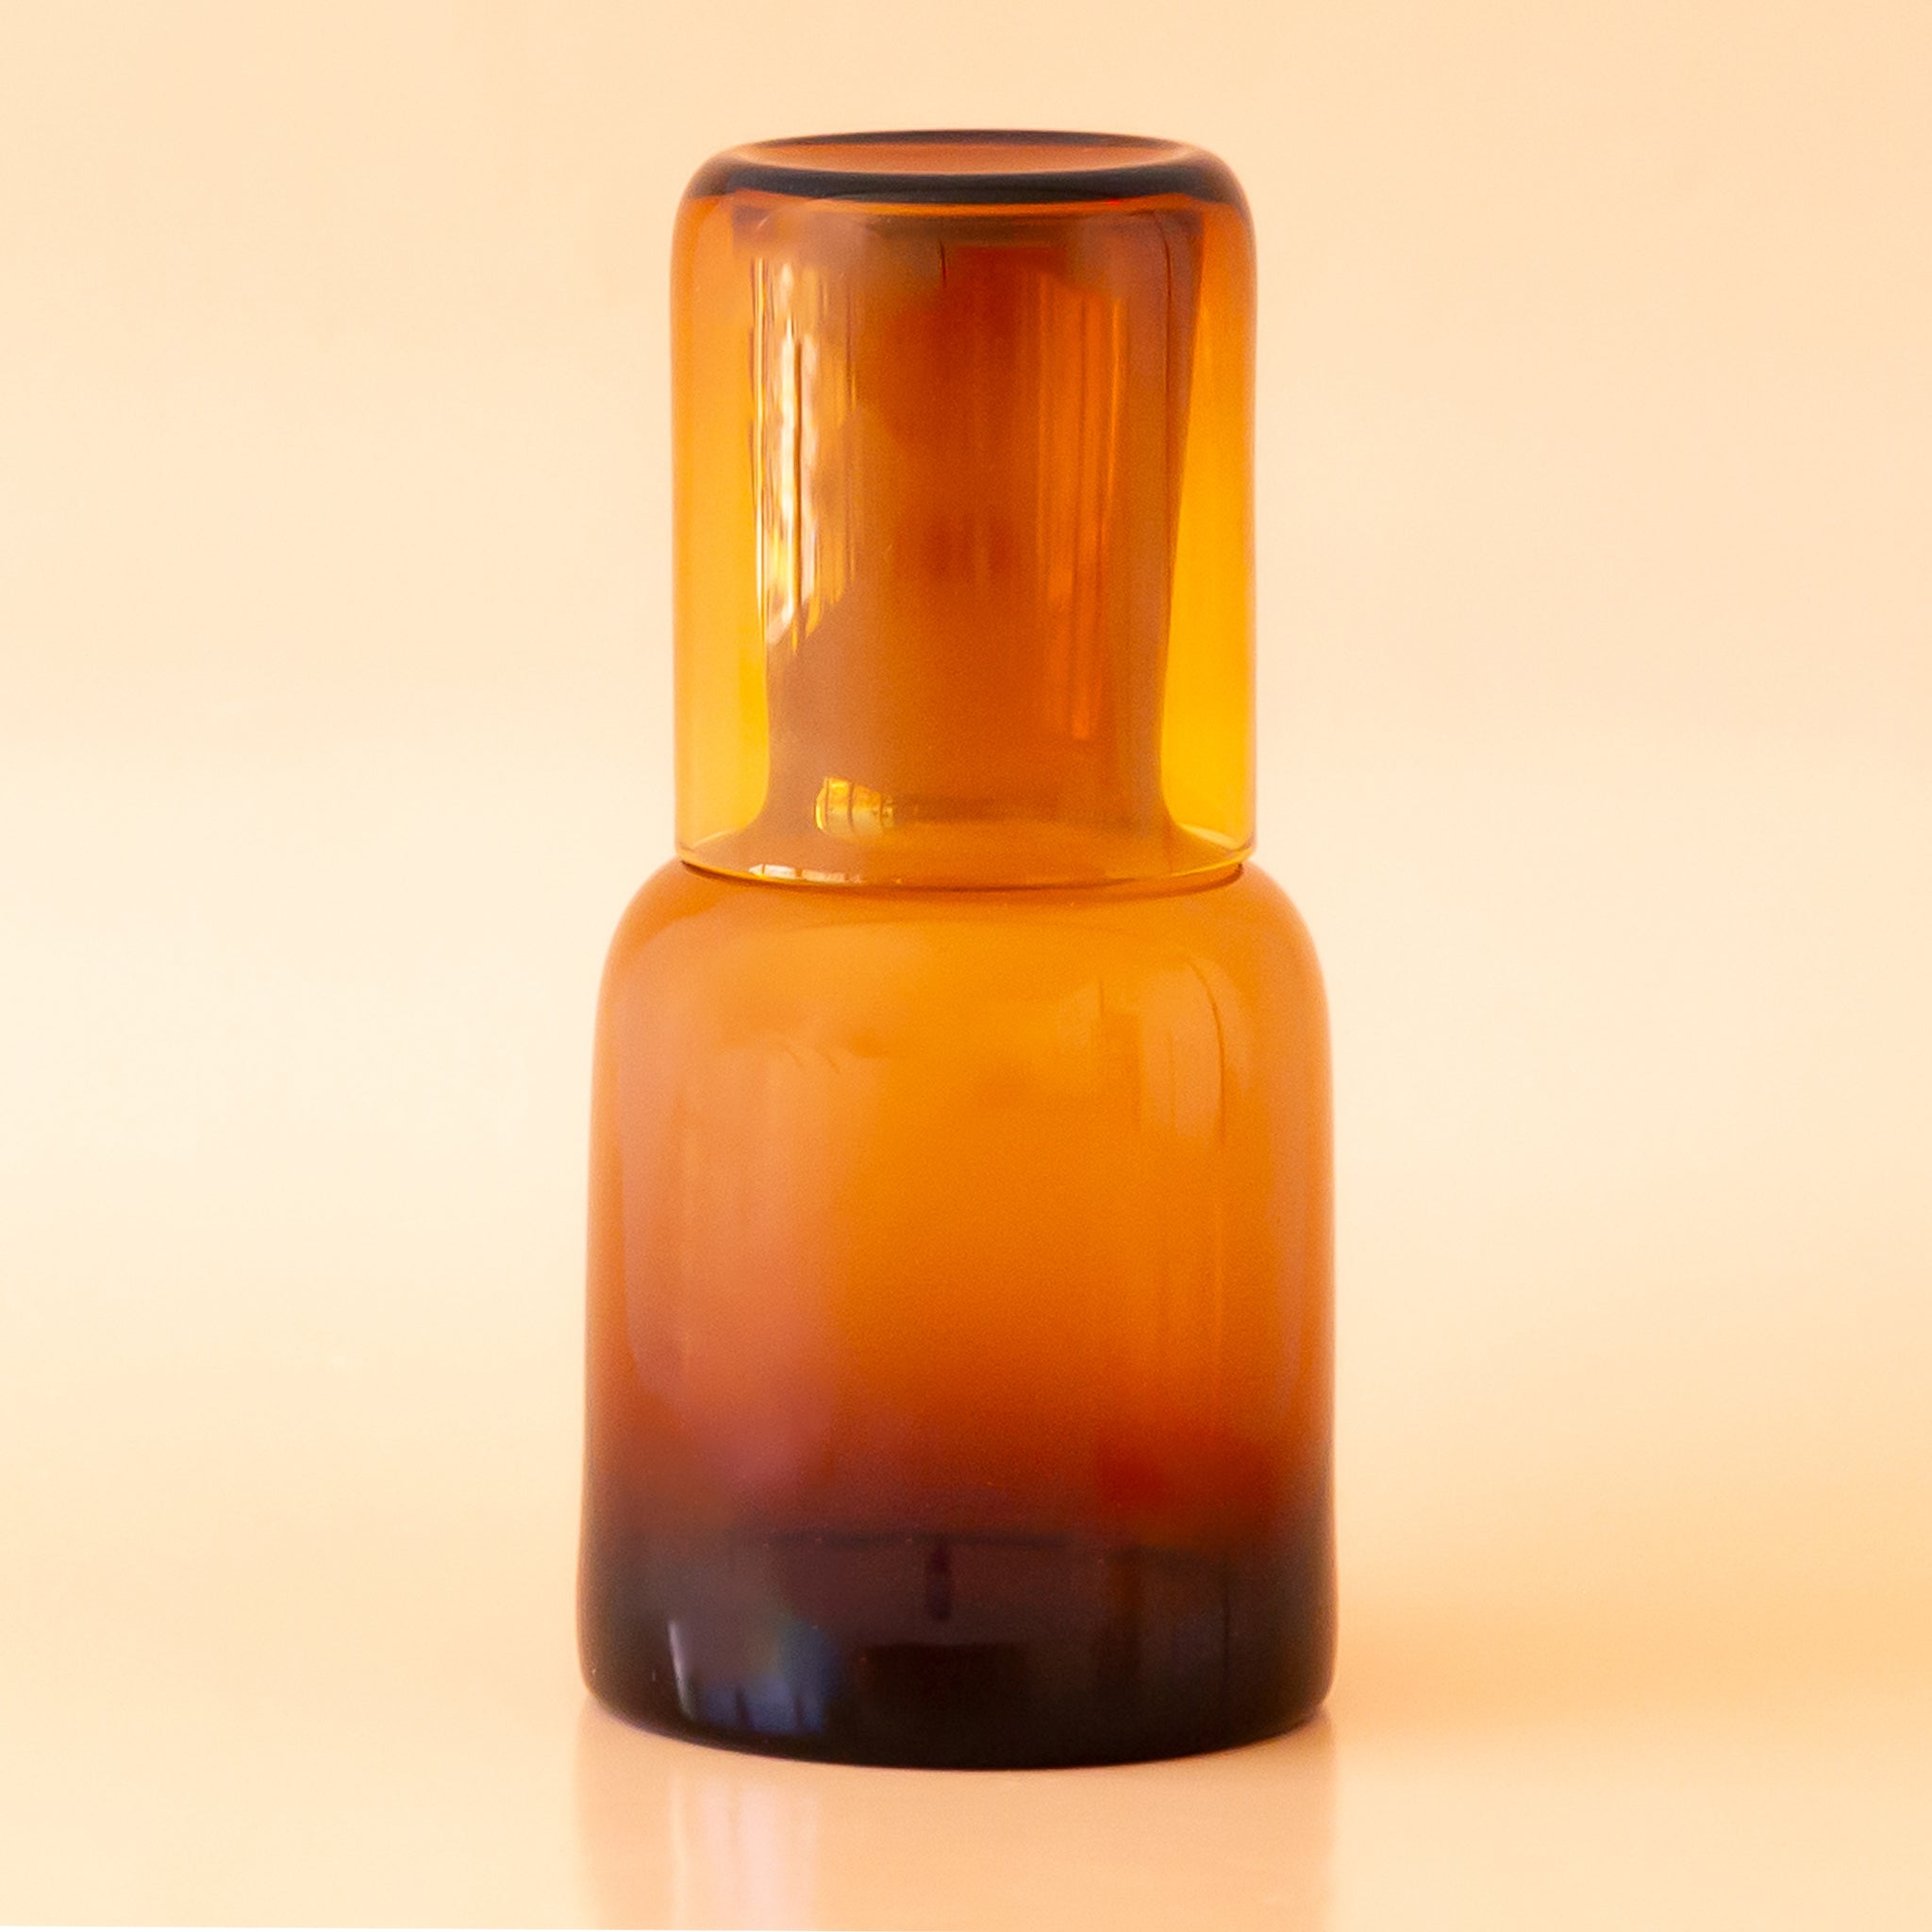 On a tan background is an amber glass carafe with a lid that doubles as a drinking glass.